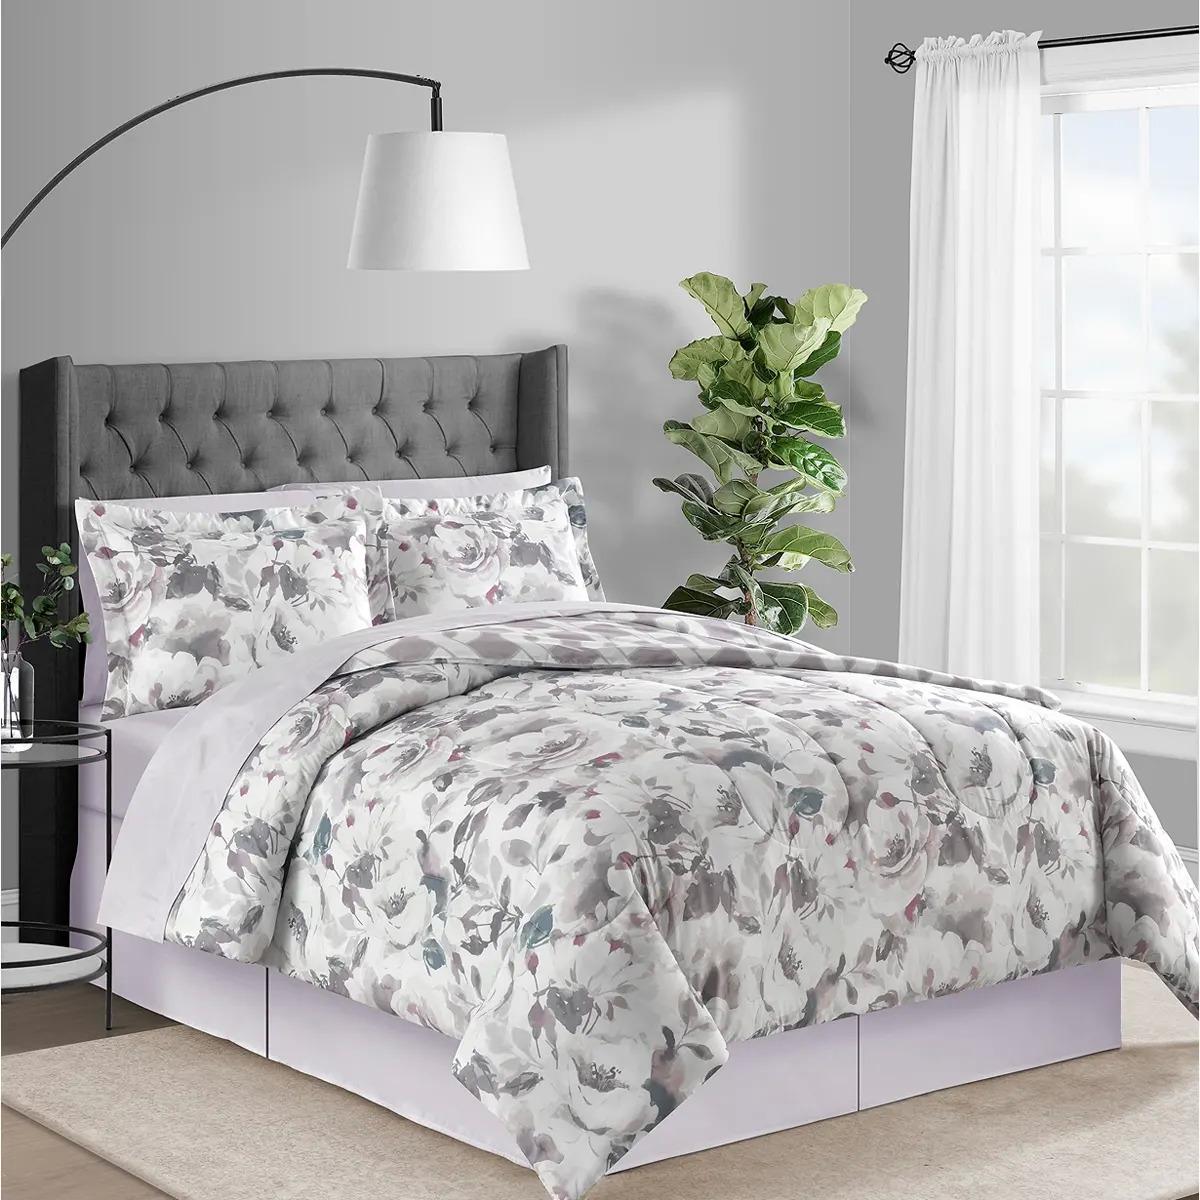 Fairfield Square Sophia 8-Piece Reversible Queen Comforter Set for $29.93 Shipped